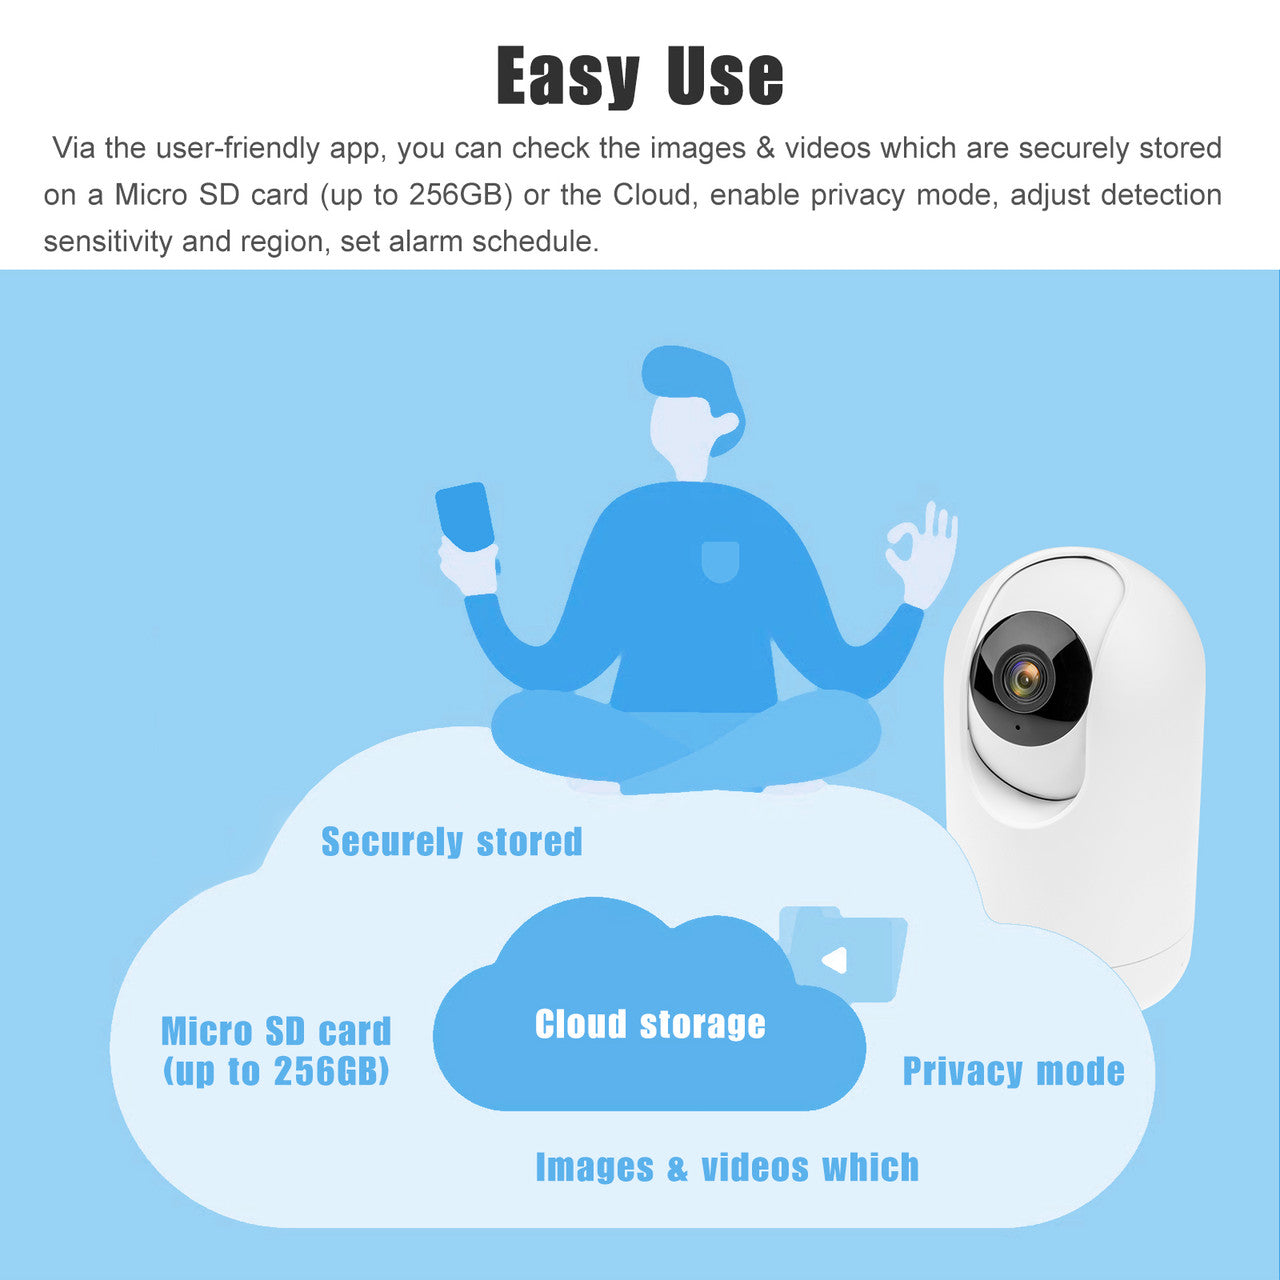 1080P FHD Wireless Camera with Night Vision Motion Detection, 2-Way Audio Home Security